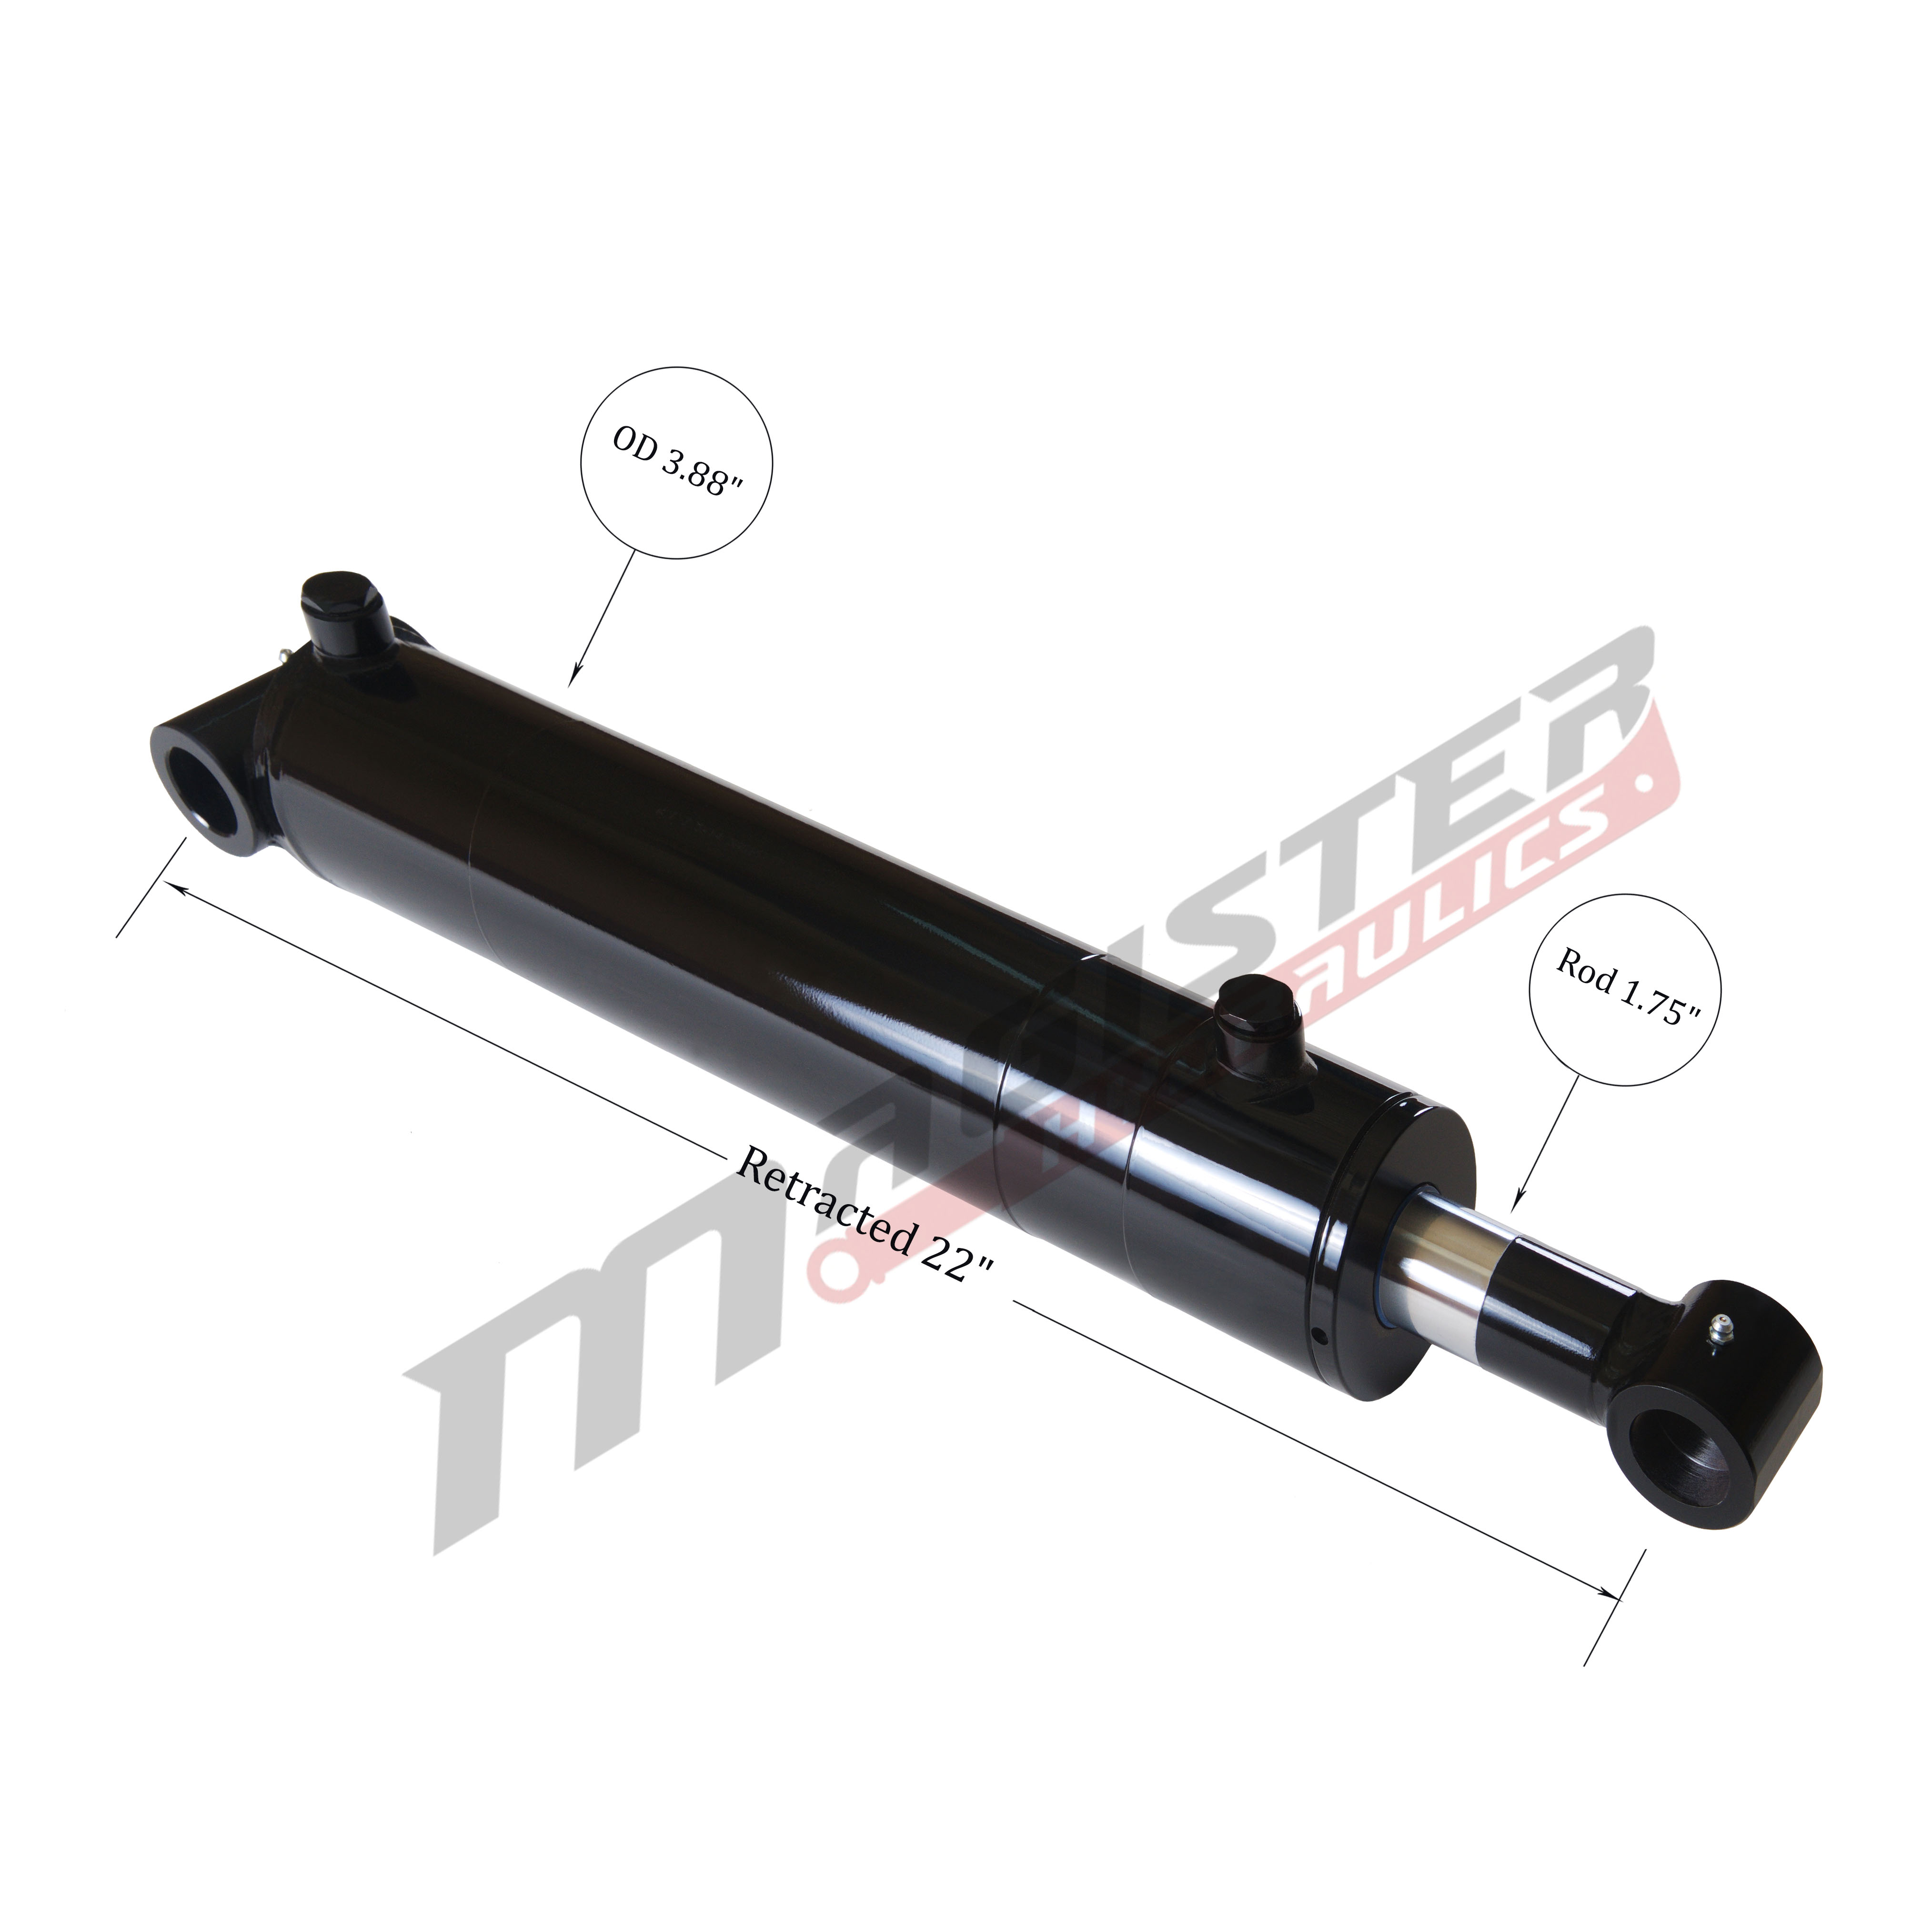 3.5 bore x 12 stroke hydraulic cylinder, welded cross tube double acting cylinder | Magister Hydraulics